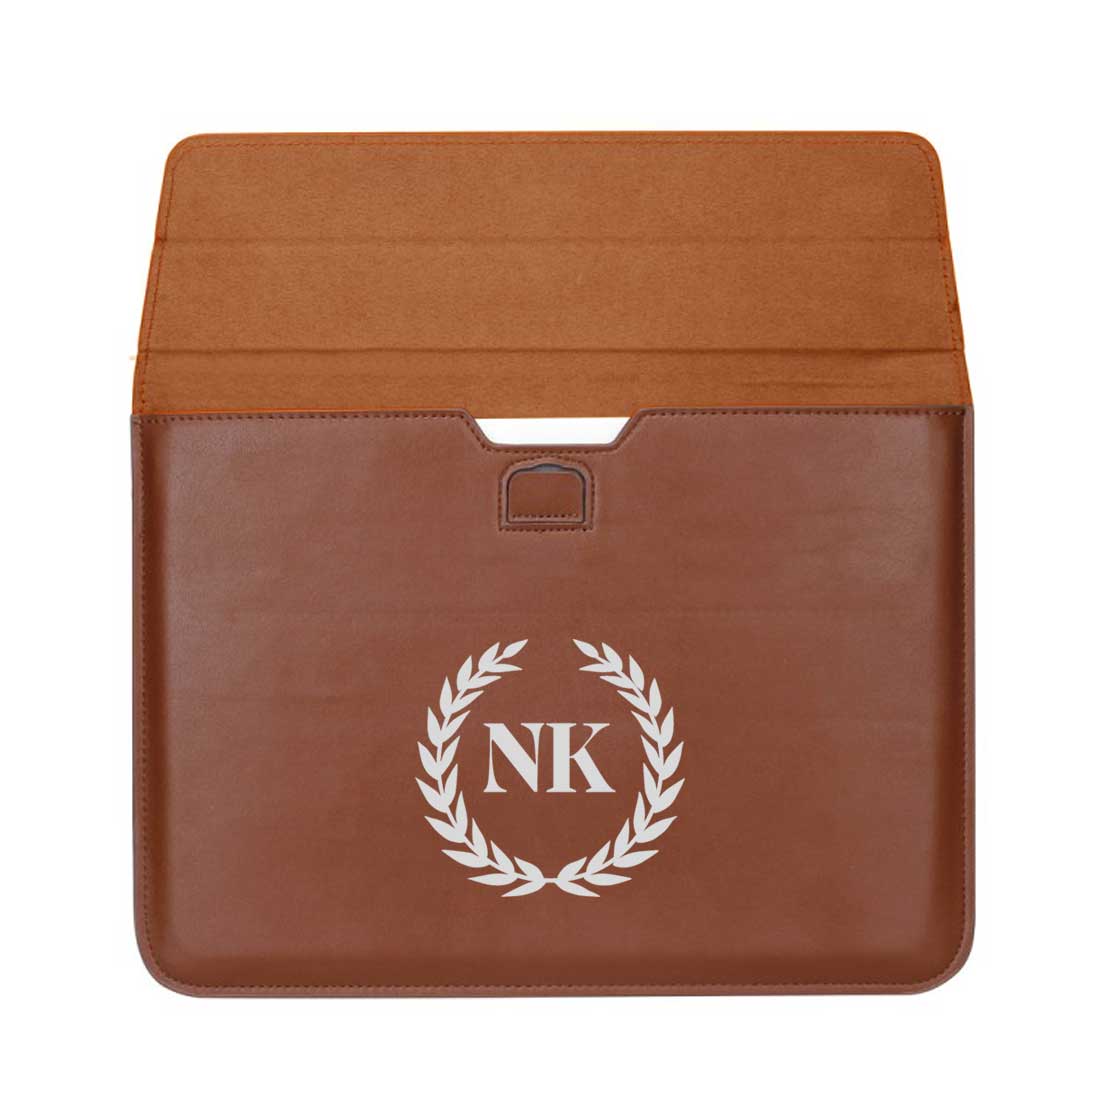 Customized Laptop Sleeve With Name - Add Your Initial Leaves Nutcase